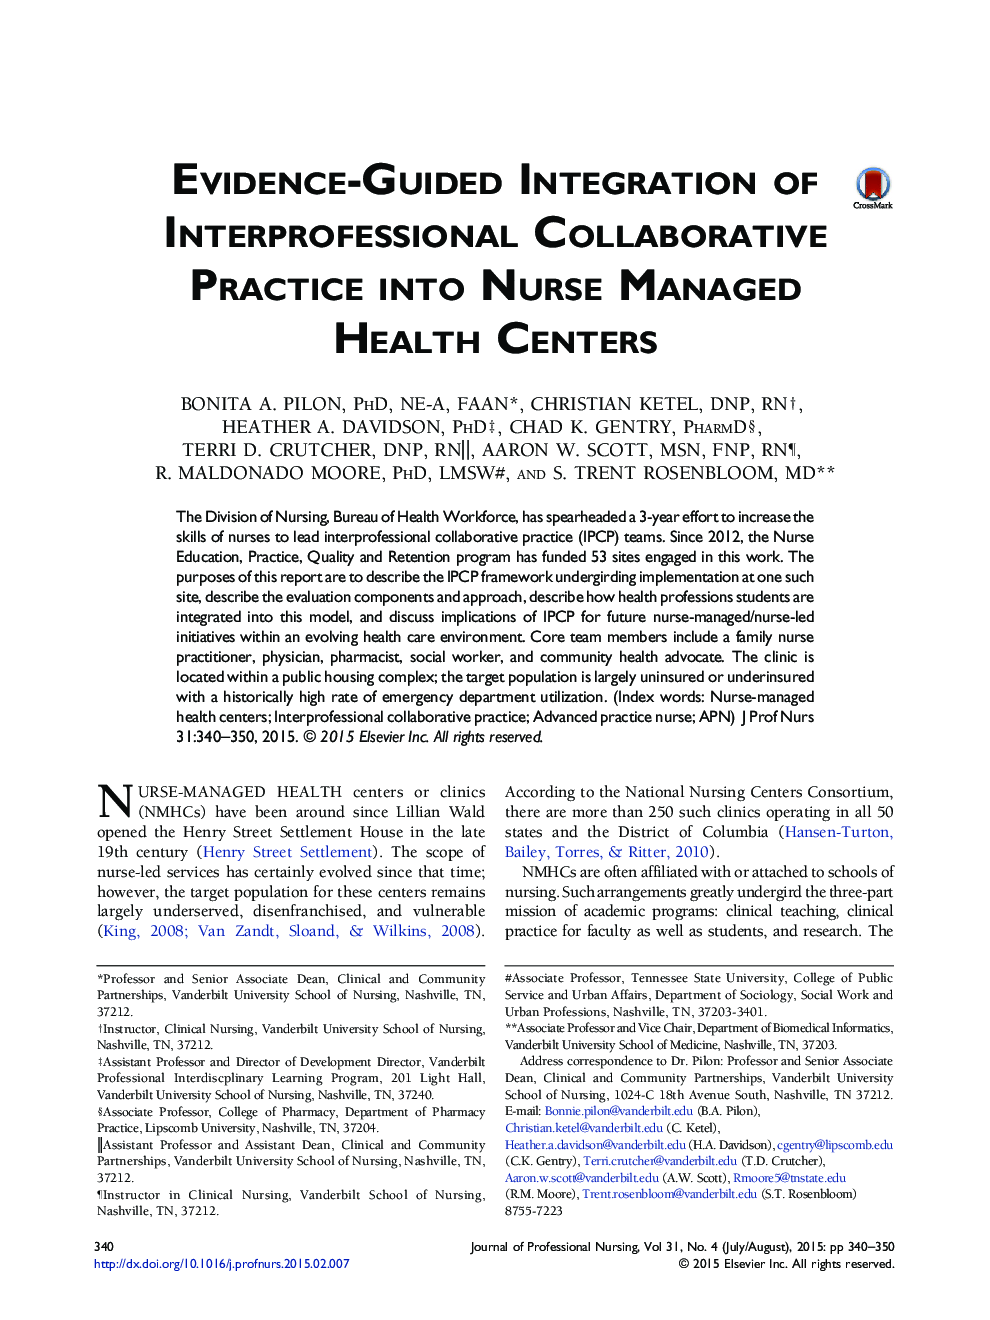 Evidence-Guided Integration of Interprofessional Collaborative Practice into Nurse Managed Health Centers